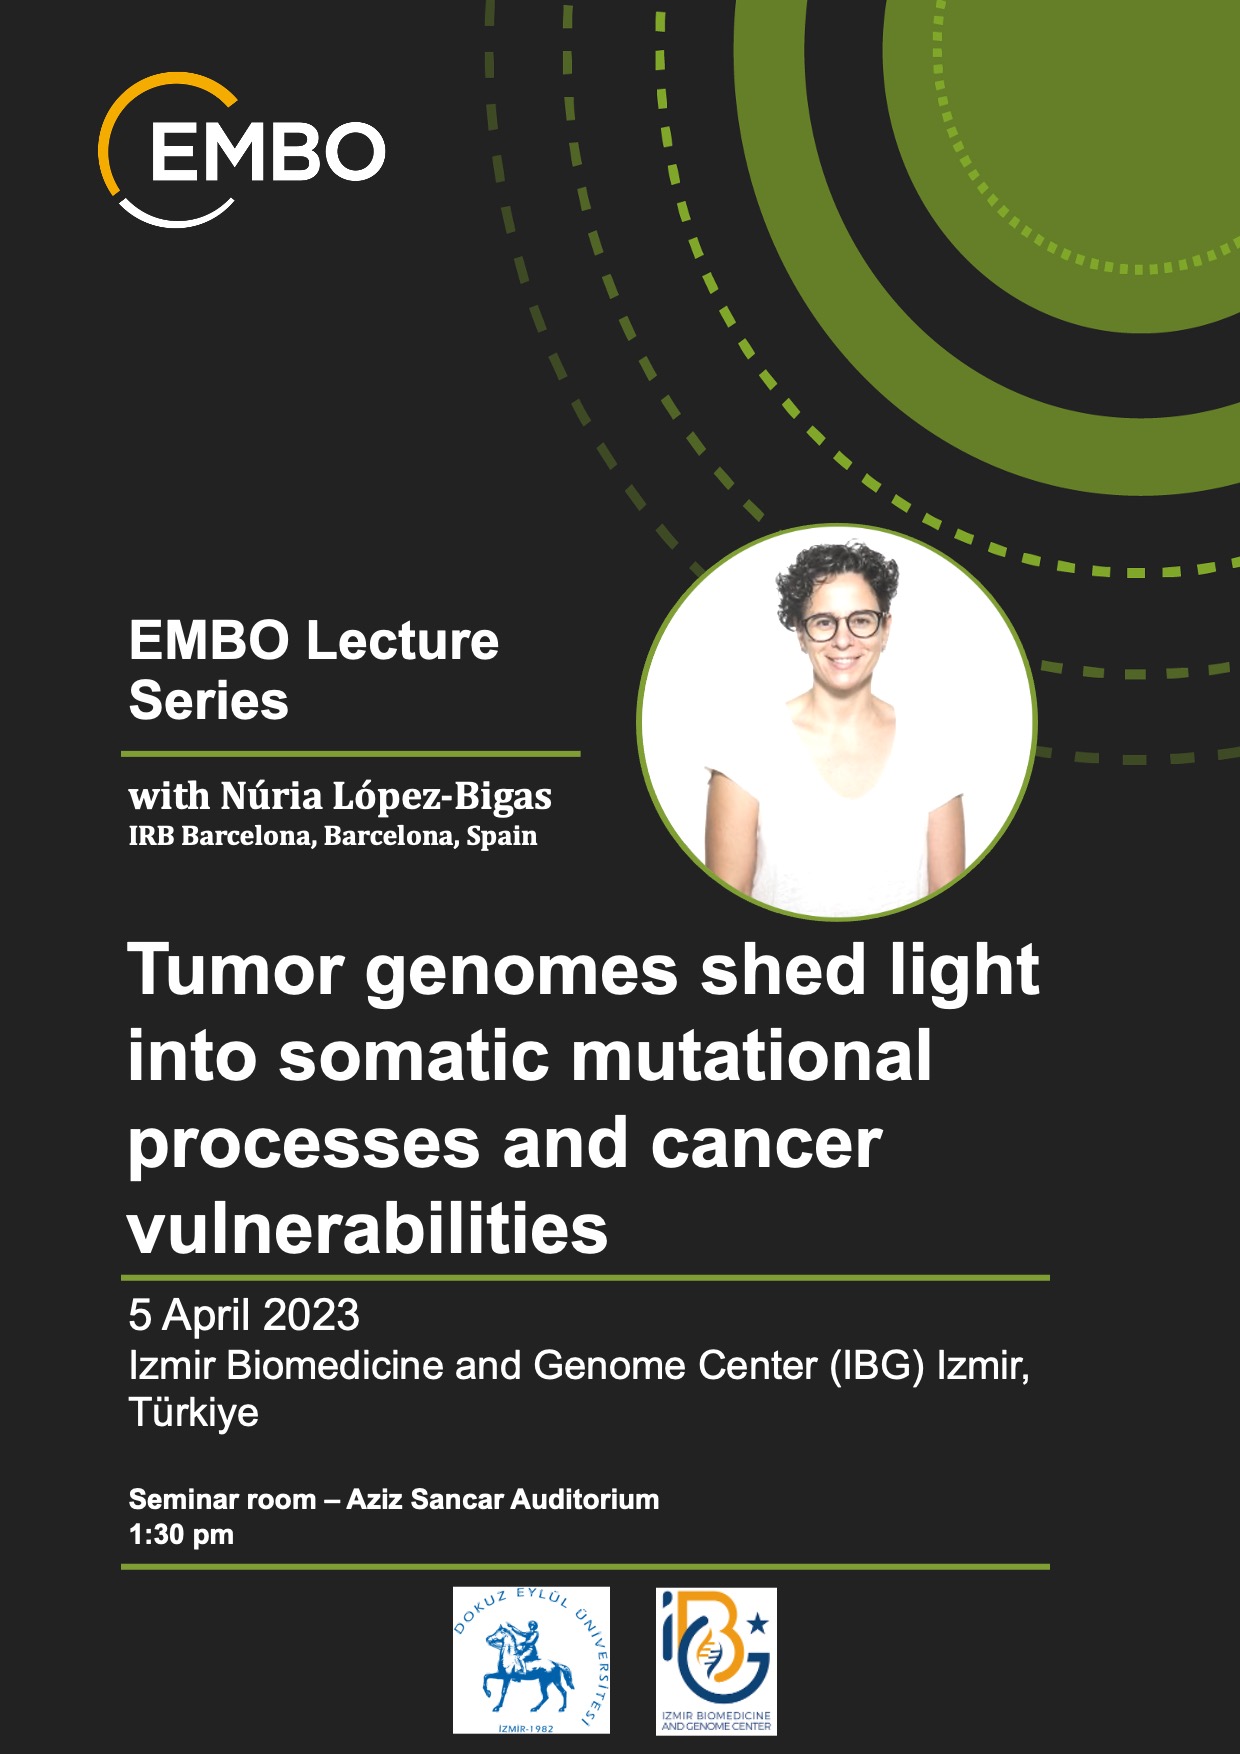 Tumor genomes shed light into somatic mutational processes and cancer vulnerabilities